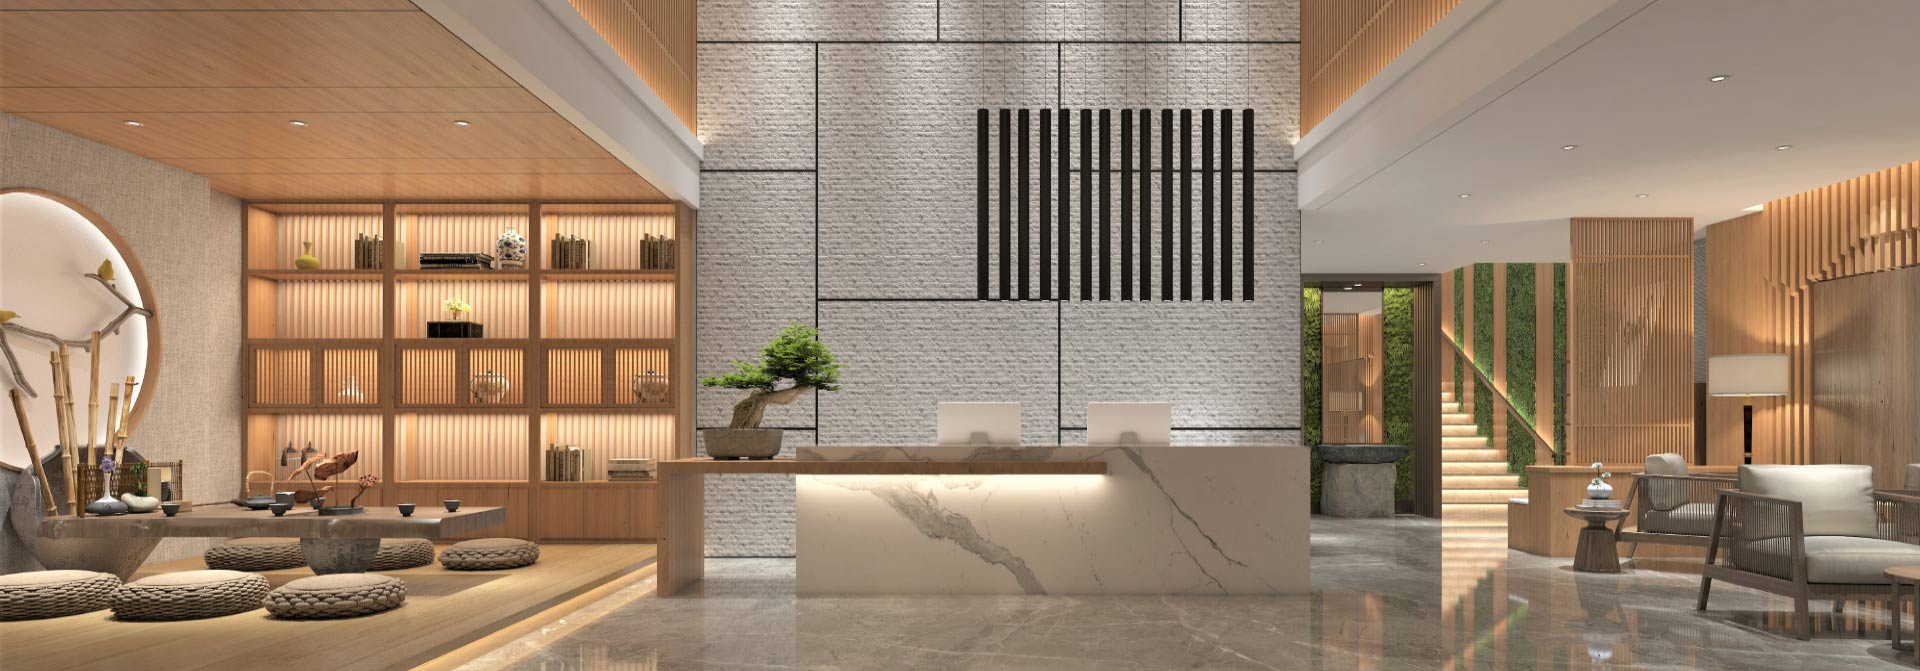 Modern hotel lobby design with a decorated reception desk and a sitting area